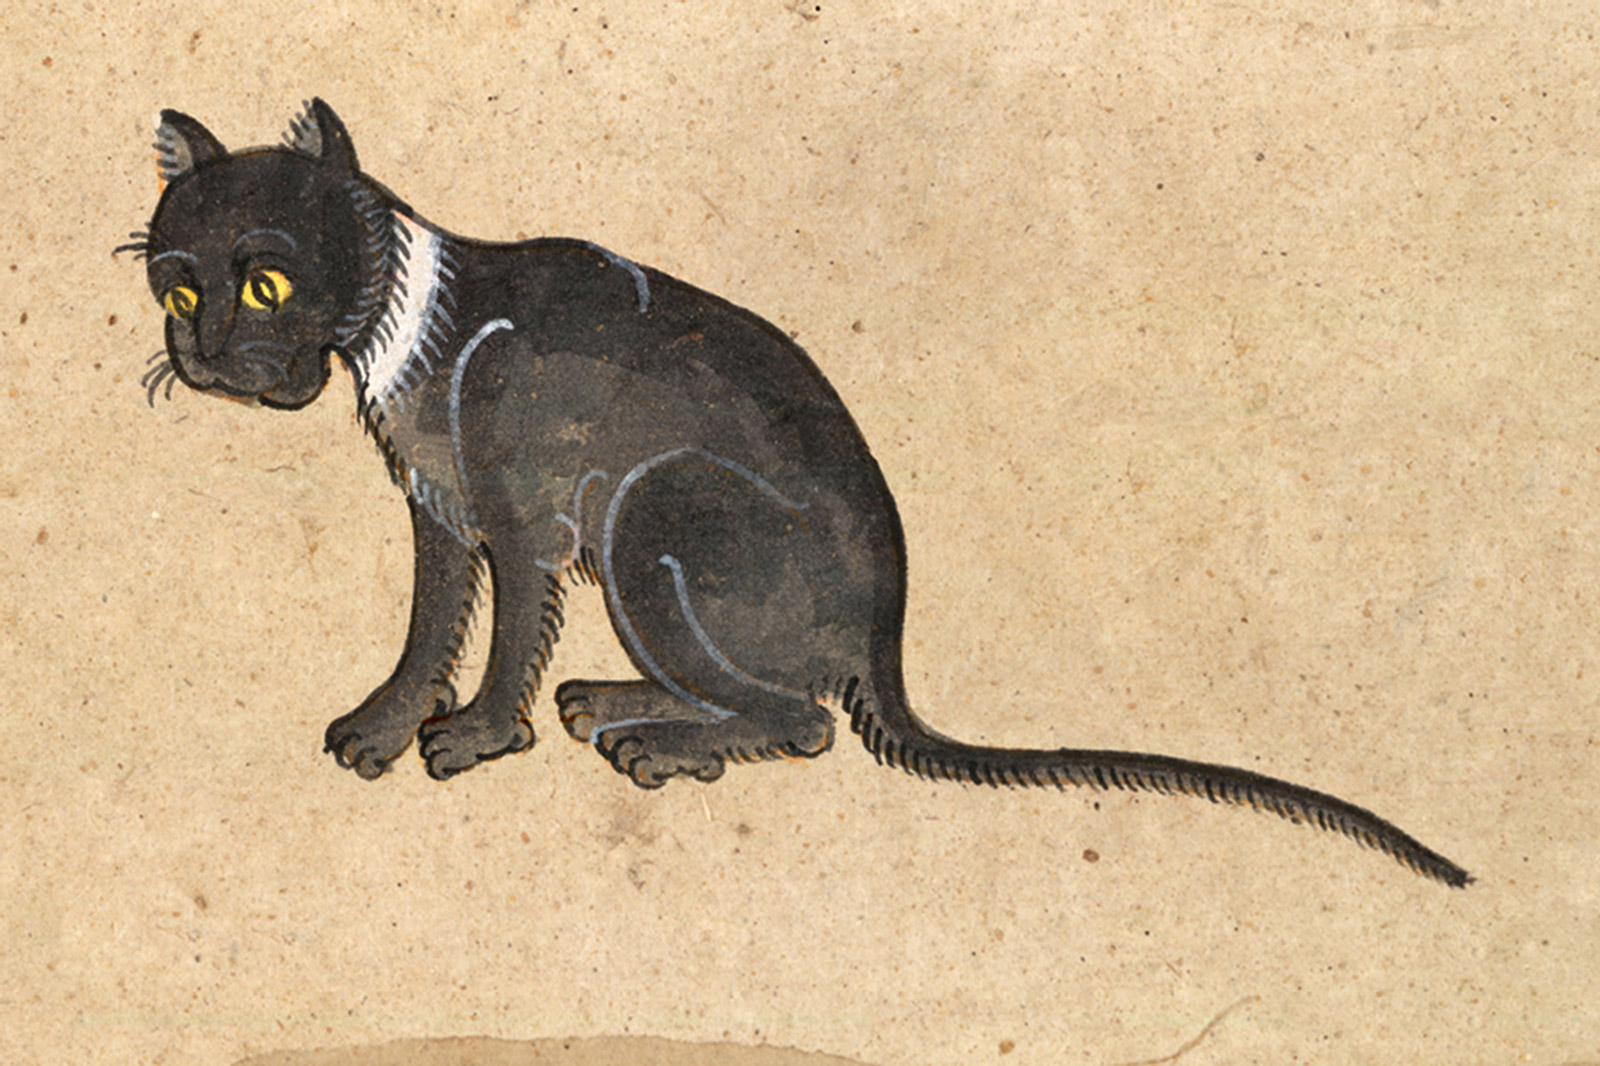 An illustration of a Ninlajak (Sapphire Circle) cat from a mid-nineteenth-century manuscript titled “Tamra Maew.” The accompanying caption reads: “The name Sapphire Circle bespeaks grace.
Body to crows’ wings truly compares,
White around the neck, and
can live in any country; this cat one should look after.”